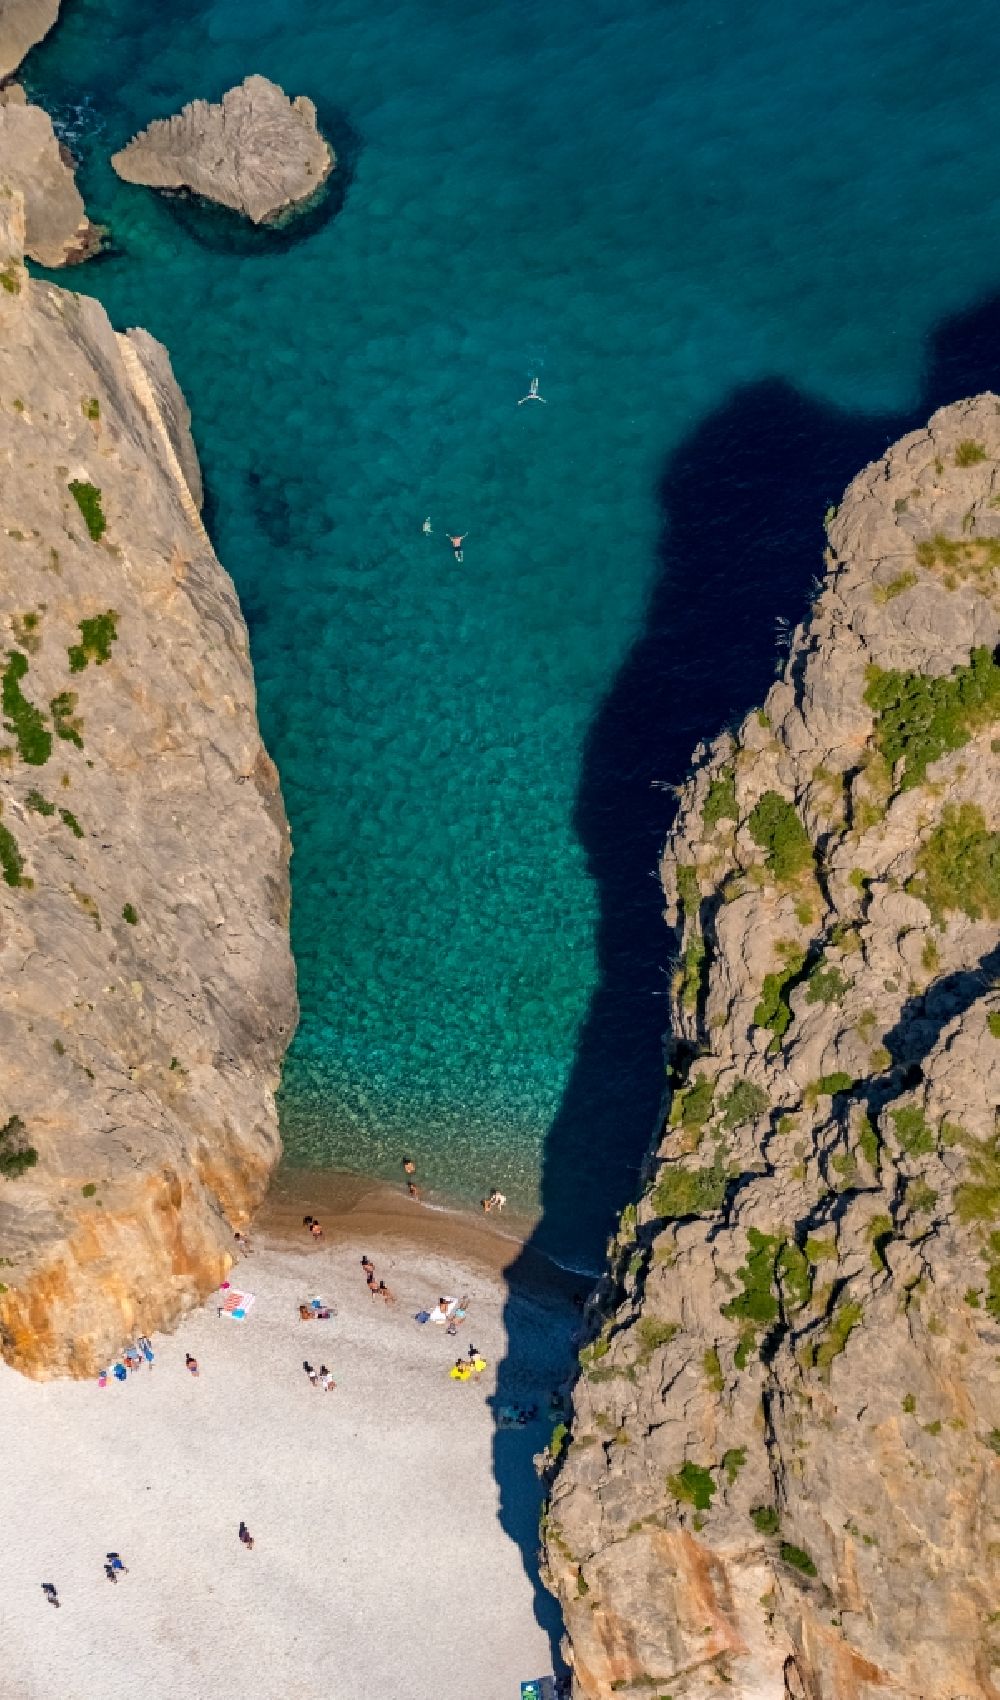 Sa Calobra from the bird's eye view: Beach landscape in the rocky bay at the Torrent de Pareis La Calobra in Sa Calobra in Balearic islands, Spain